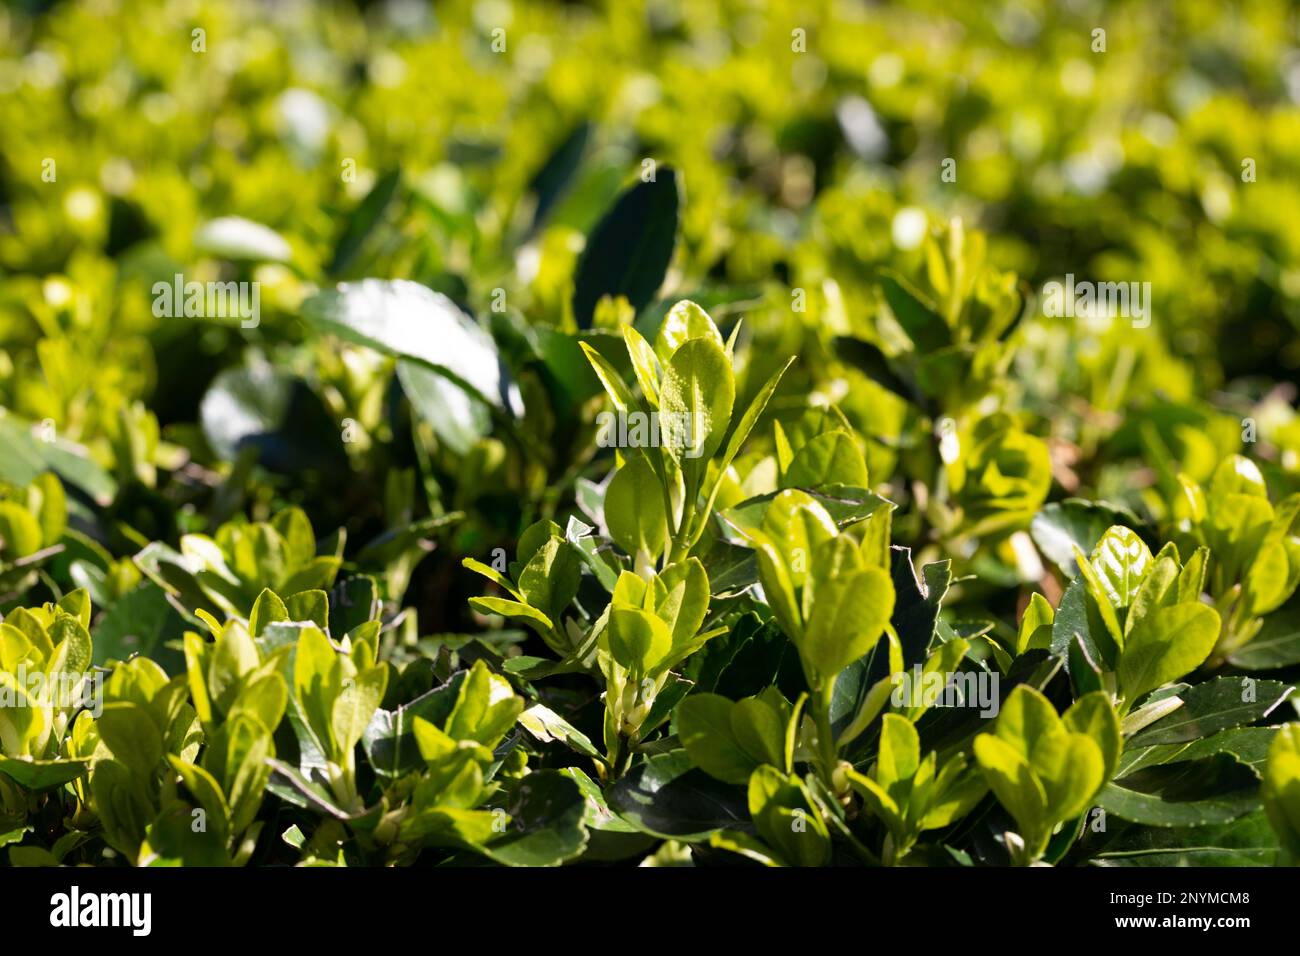 Evergreen garden plant Euonymus japonica leaves, green background Stock Photo